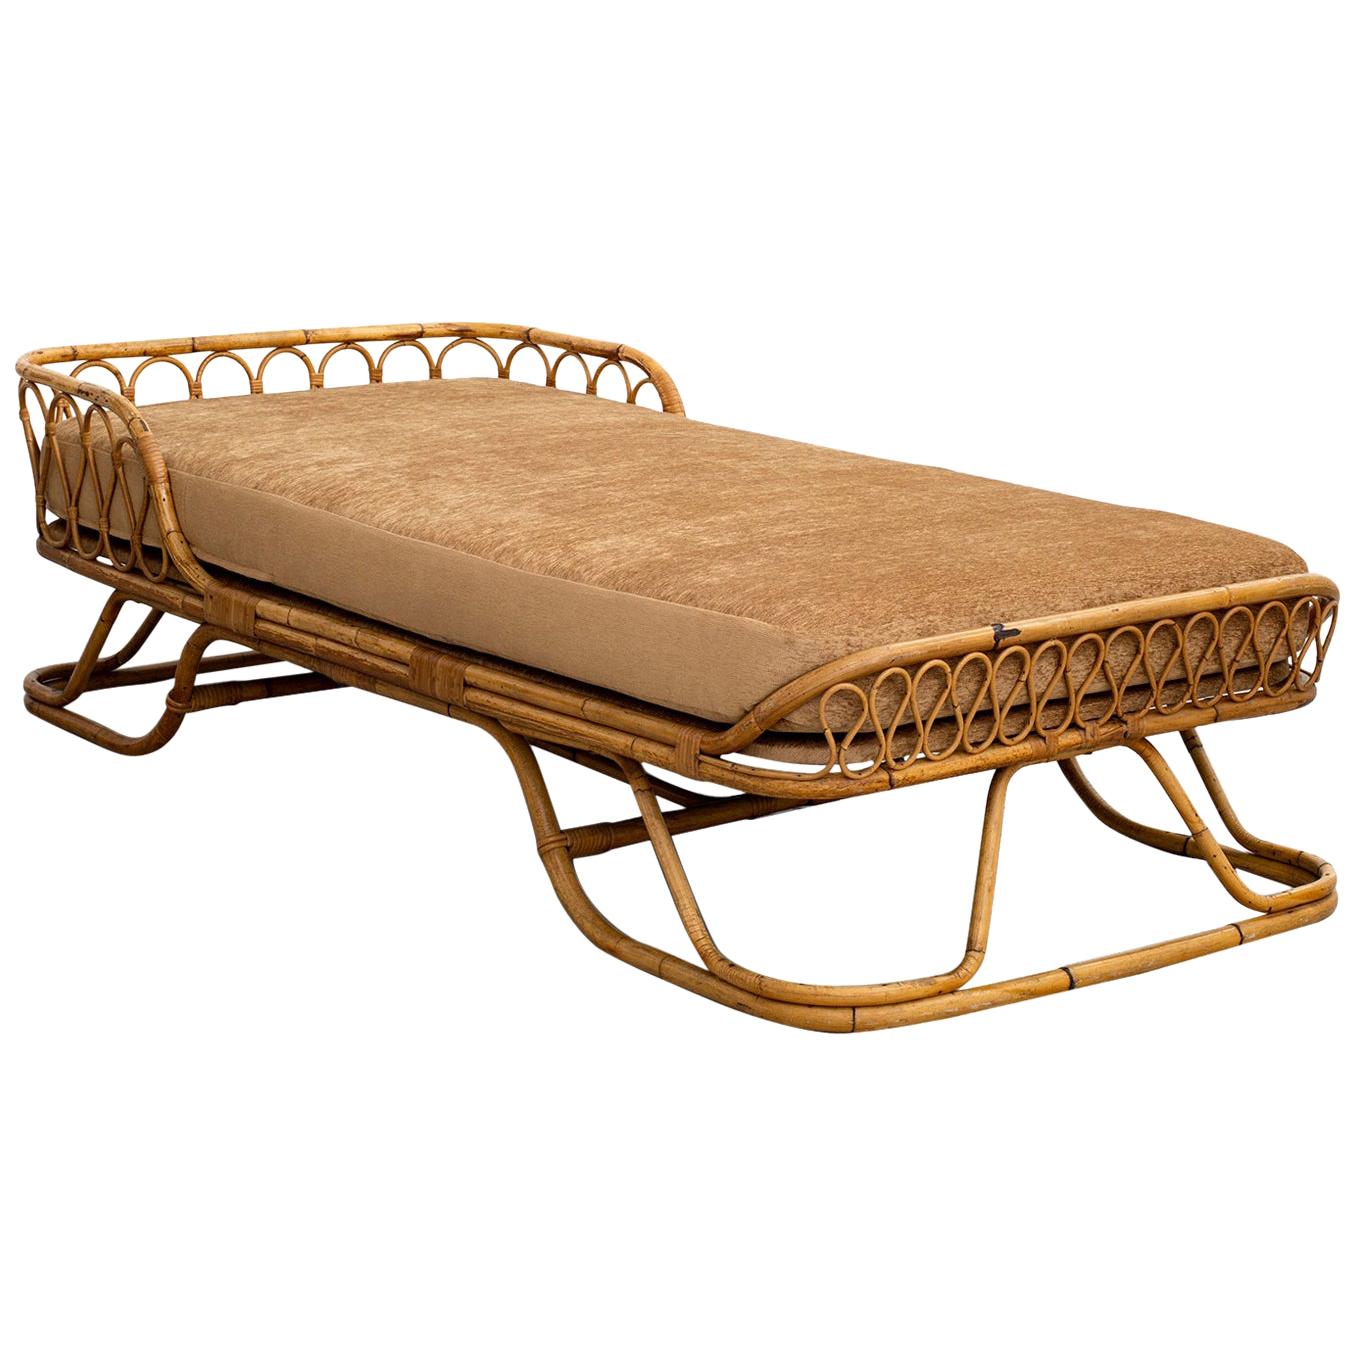 Vintage Italian Rattan Daybed